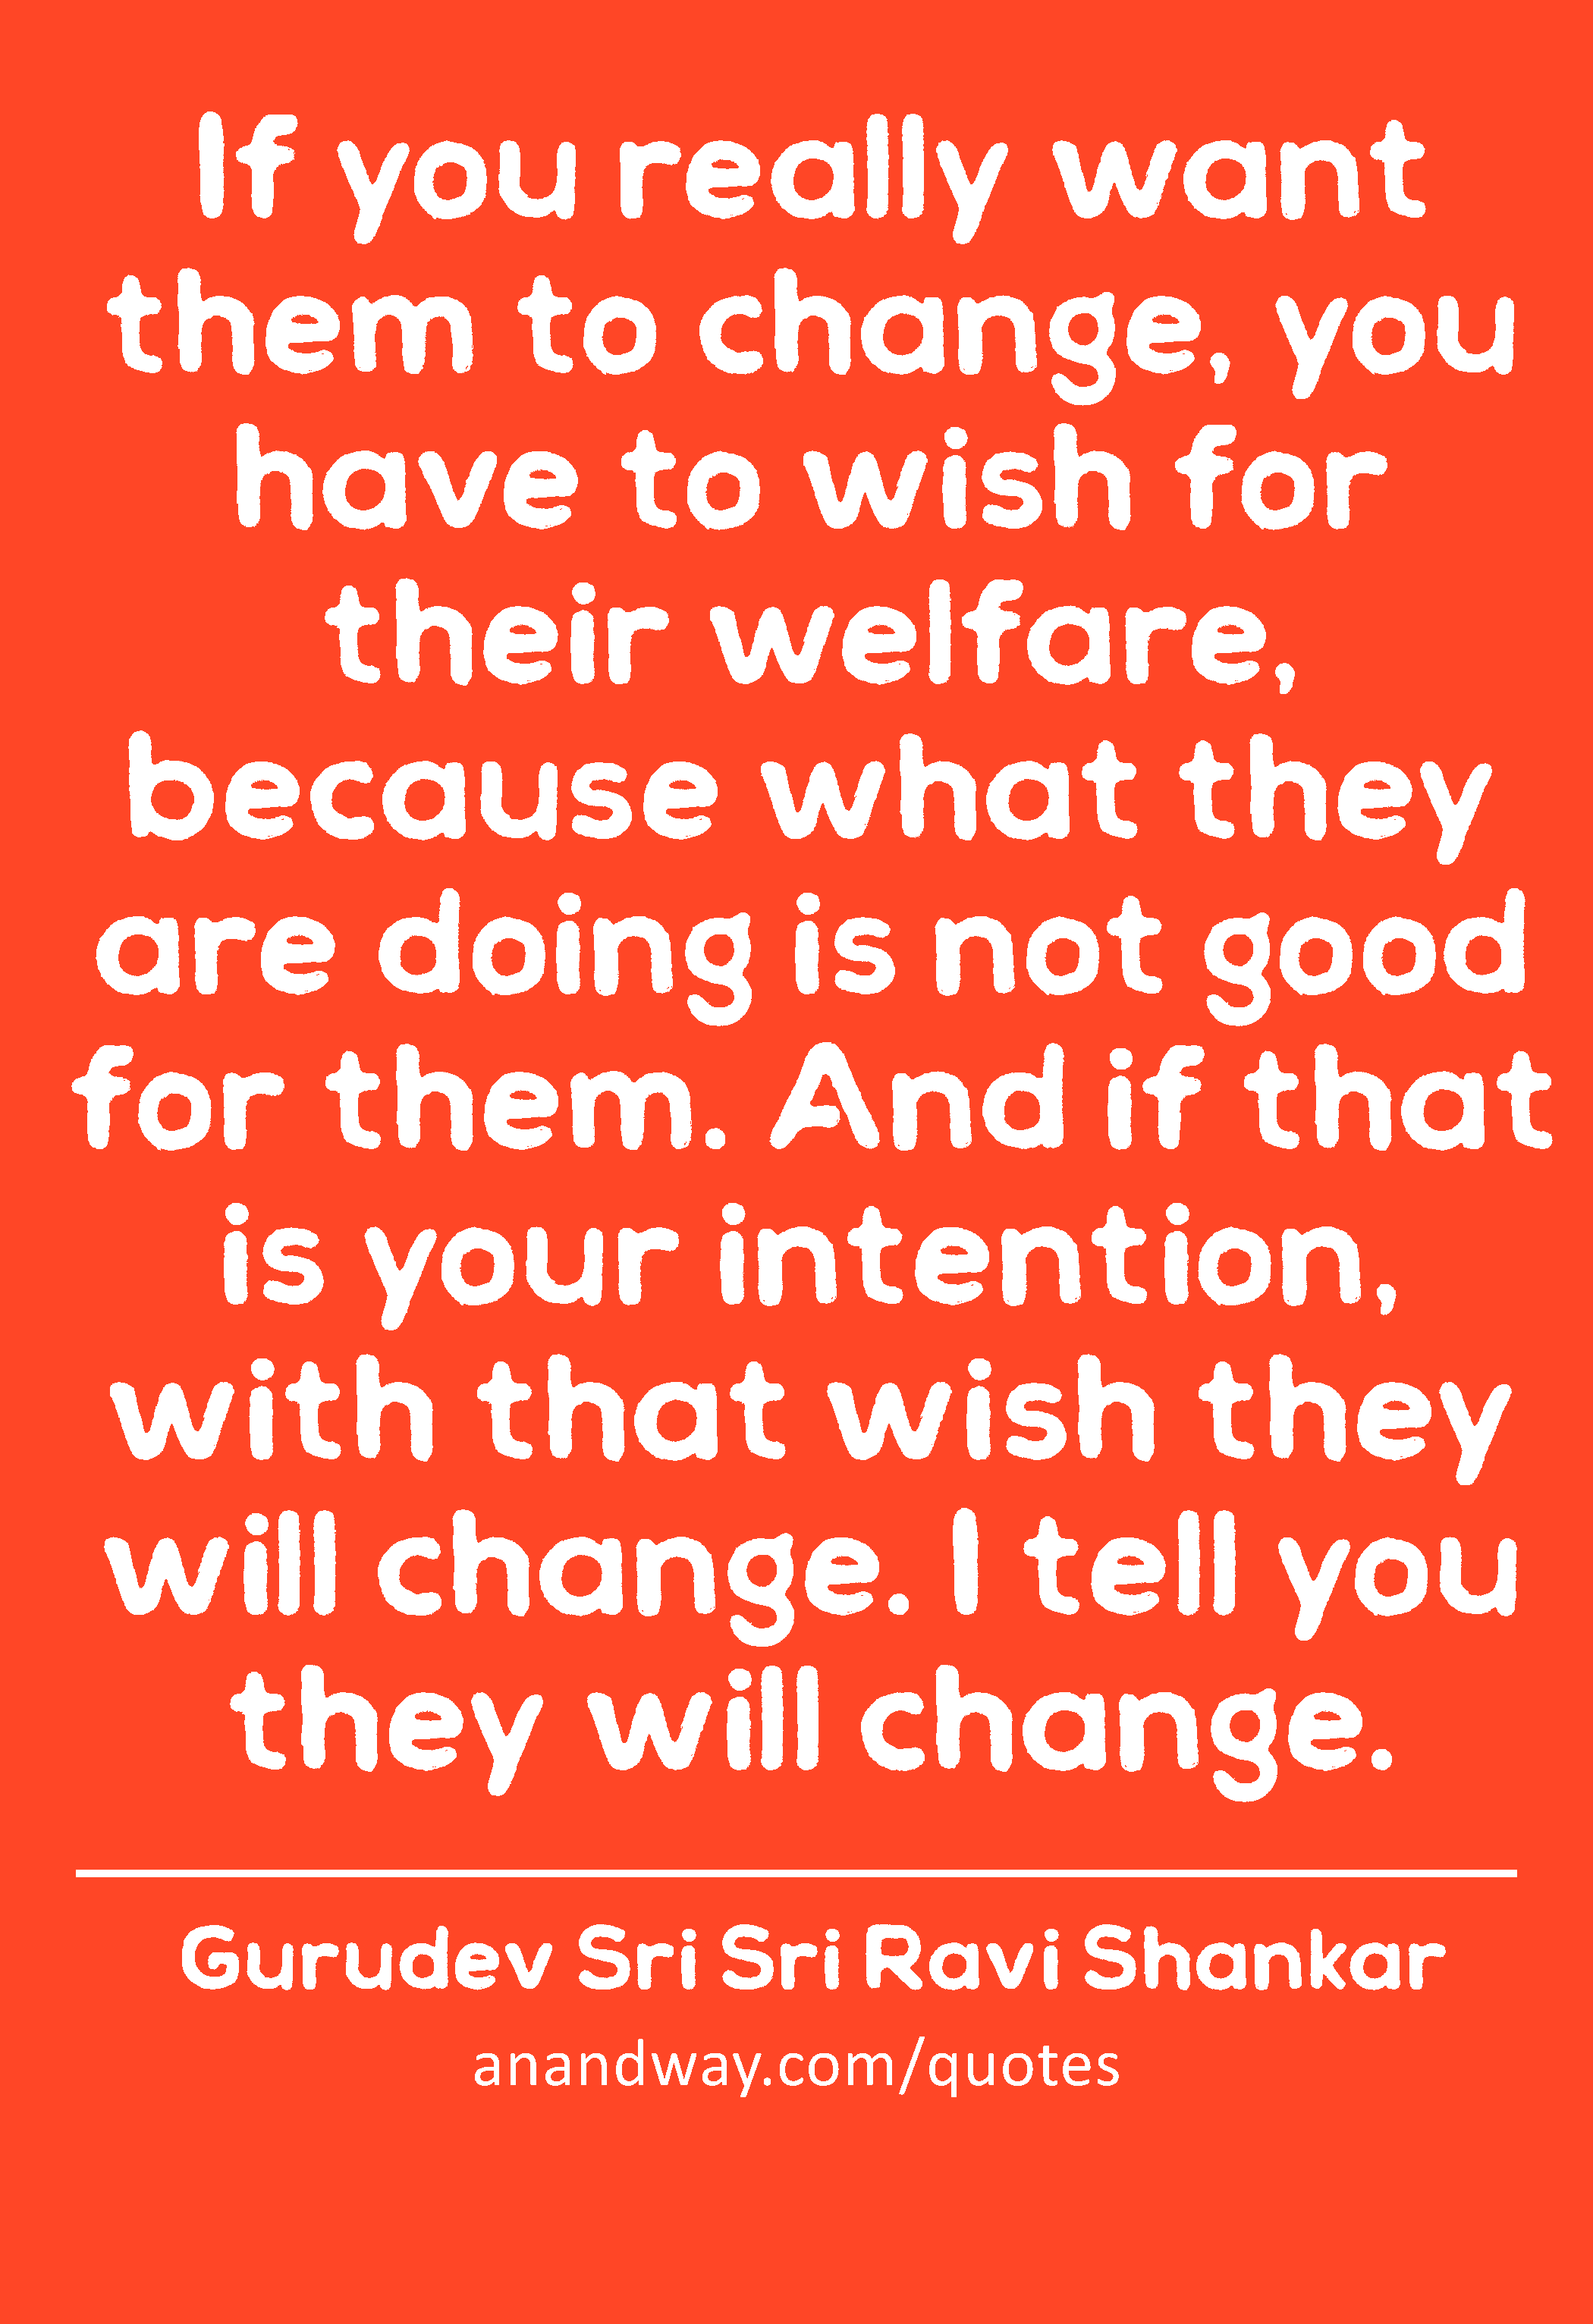 If you really want them to change, you have to wish for their welfare, because what they are doing
 -Gurudev Sri Sri Ravi Shankar